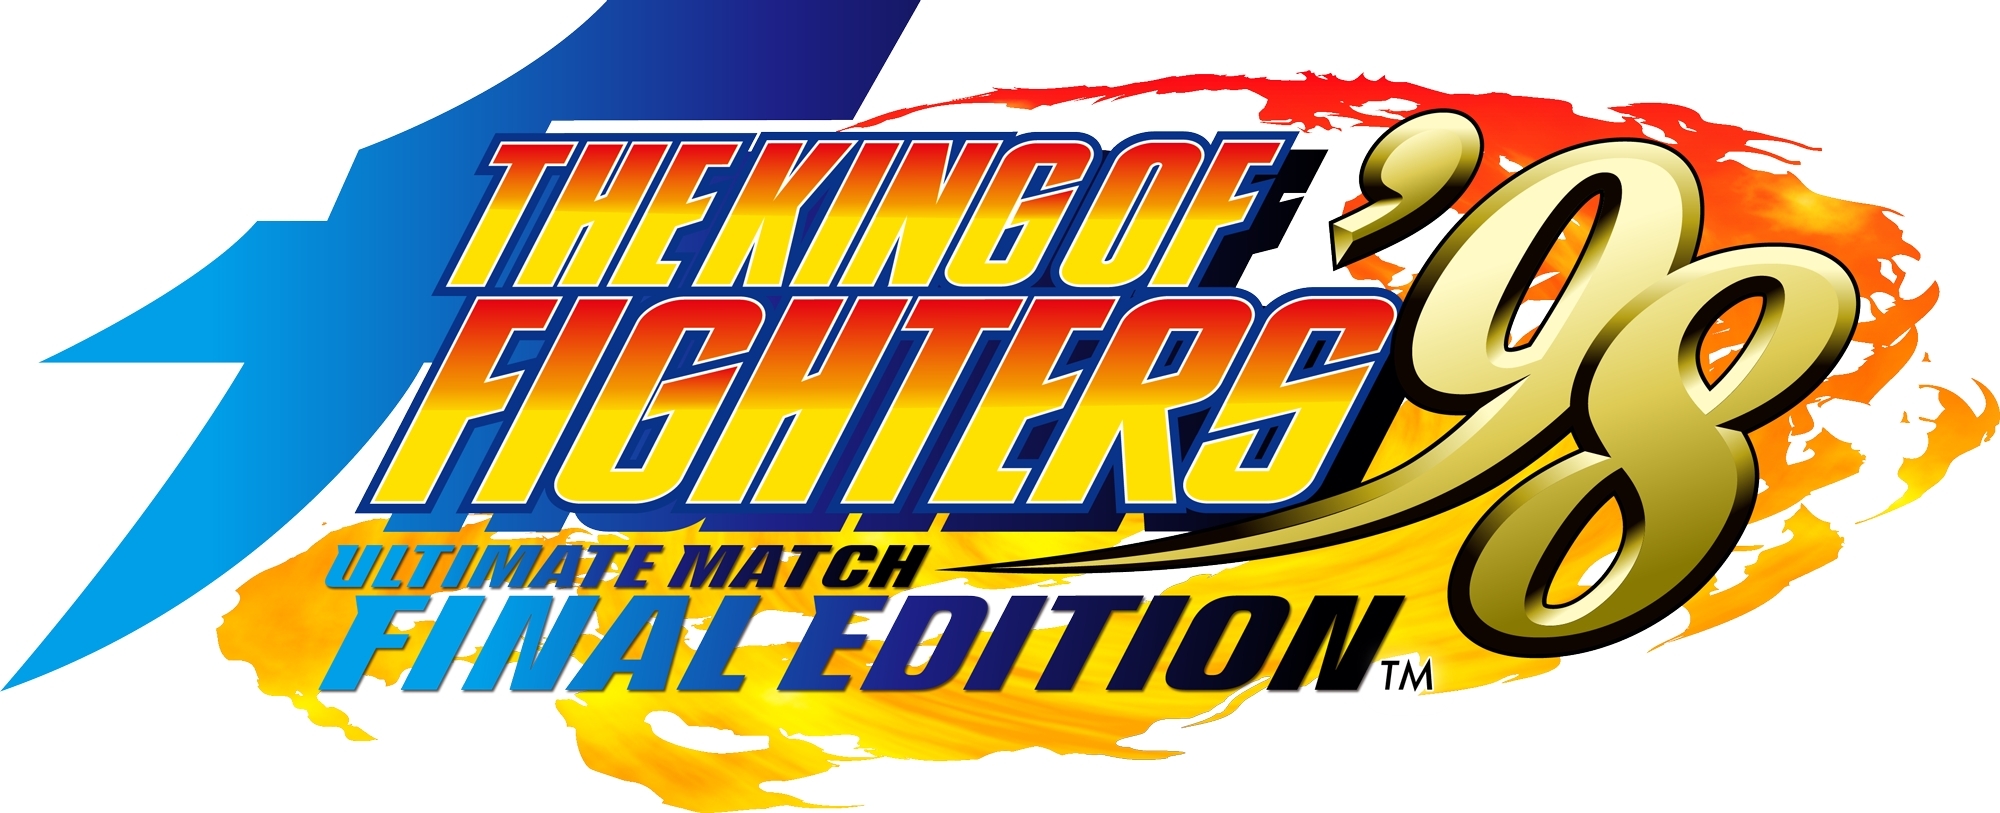 Buy THE KING OF FIGHTERS '98 ULTIMATE MATCH FINAL EDITION Steam PC